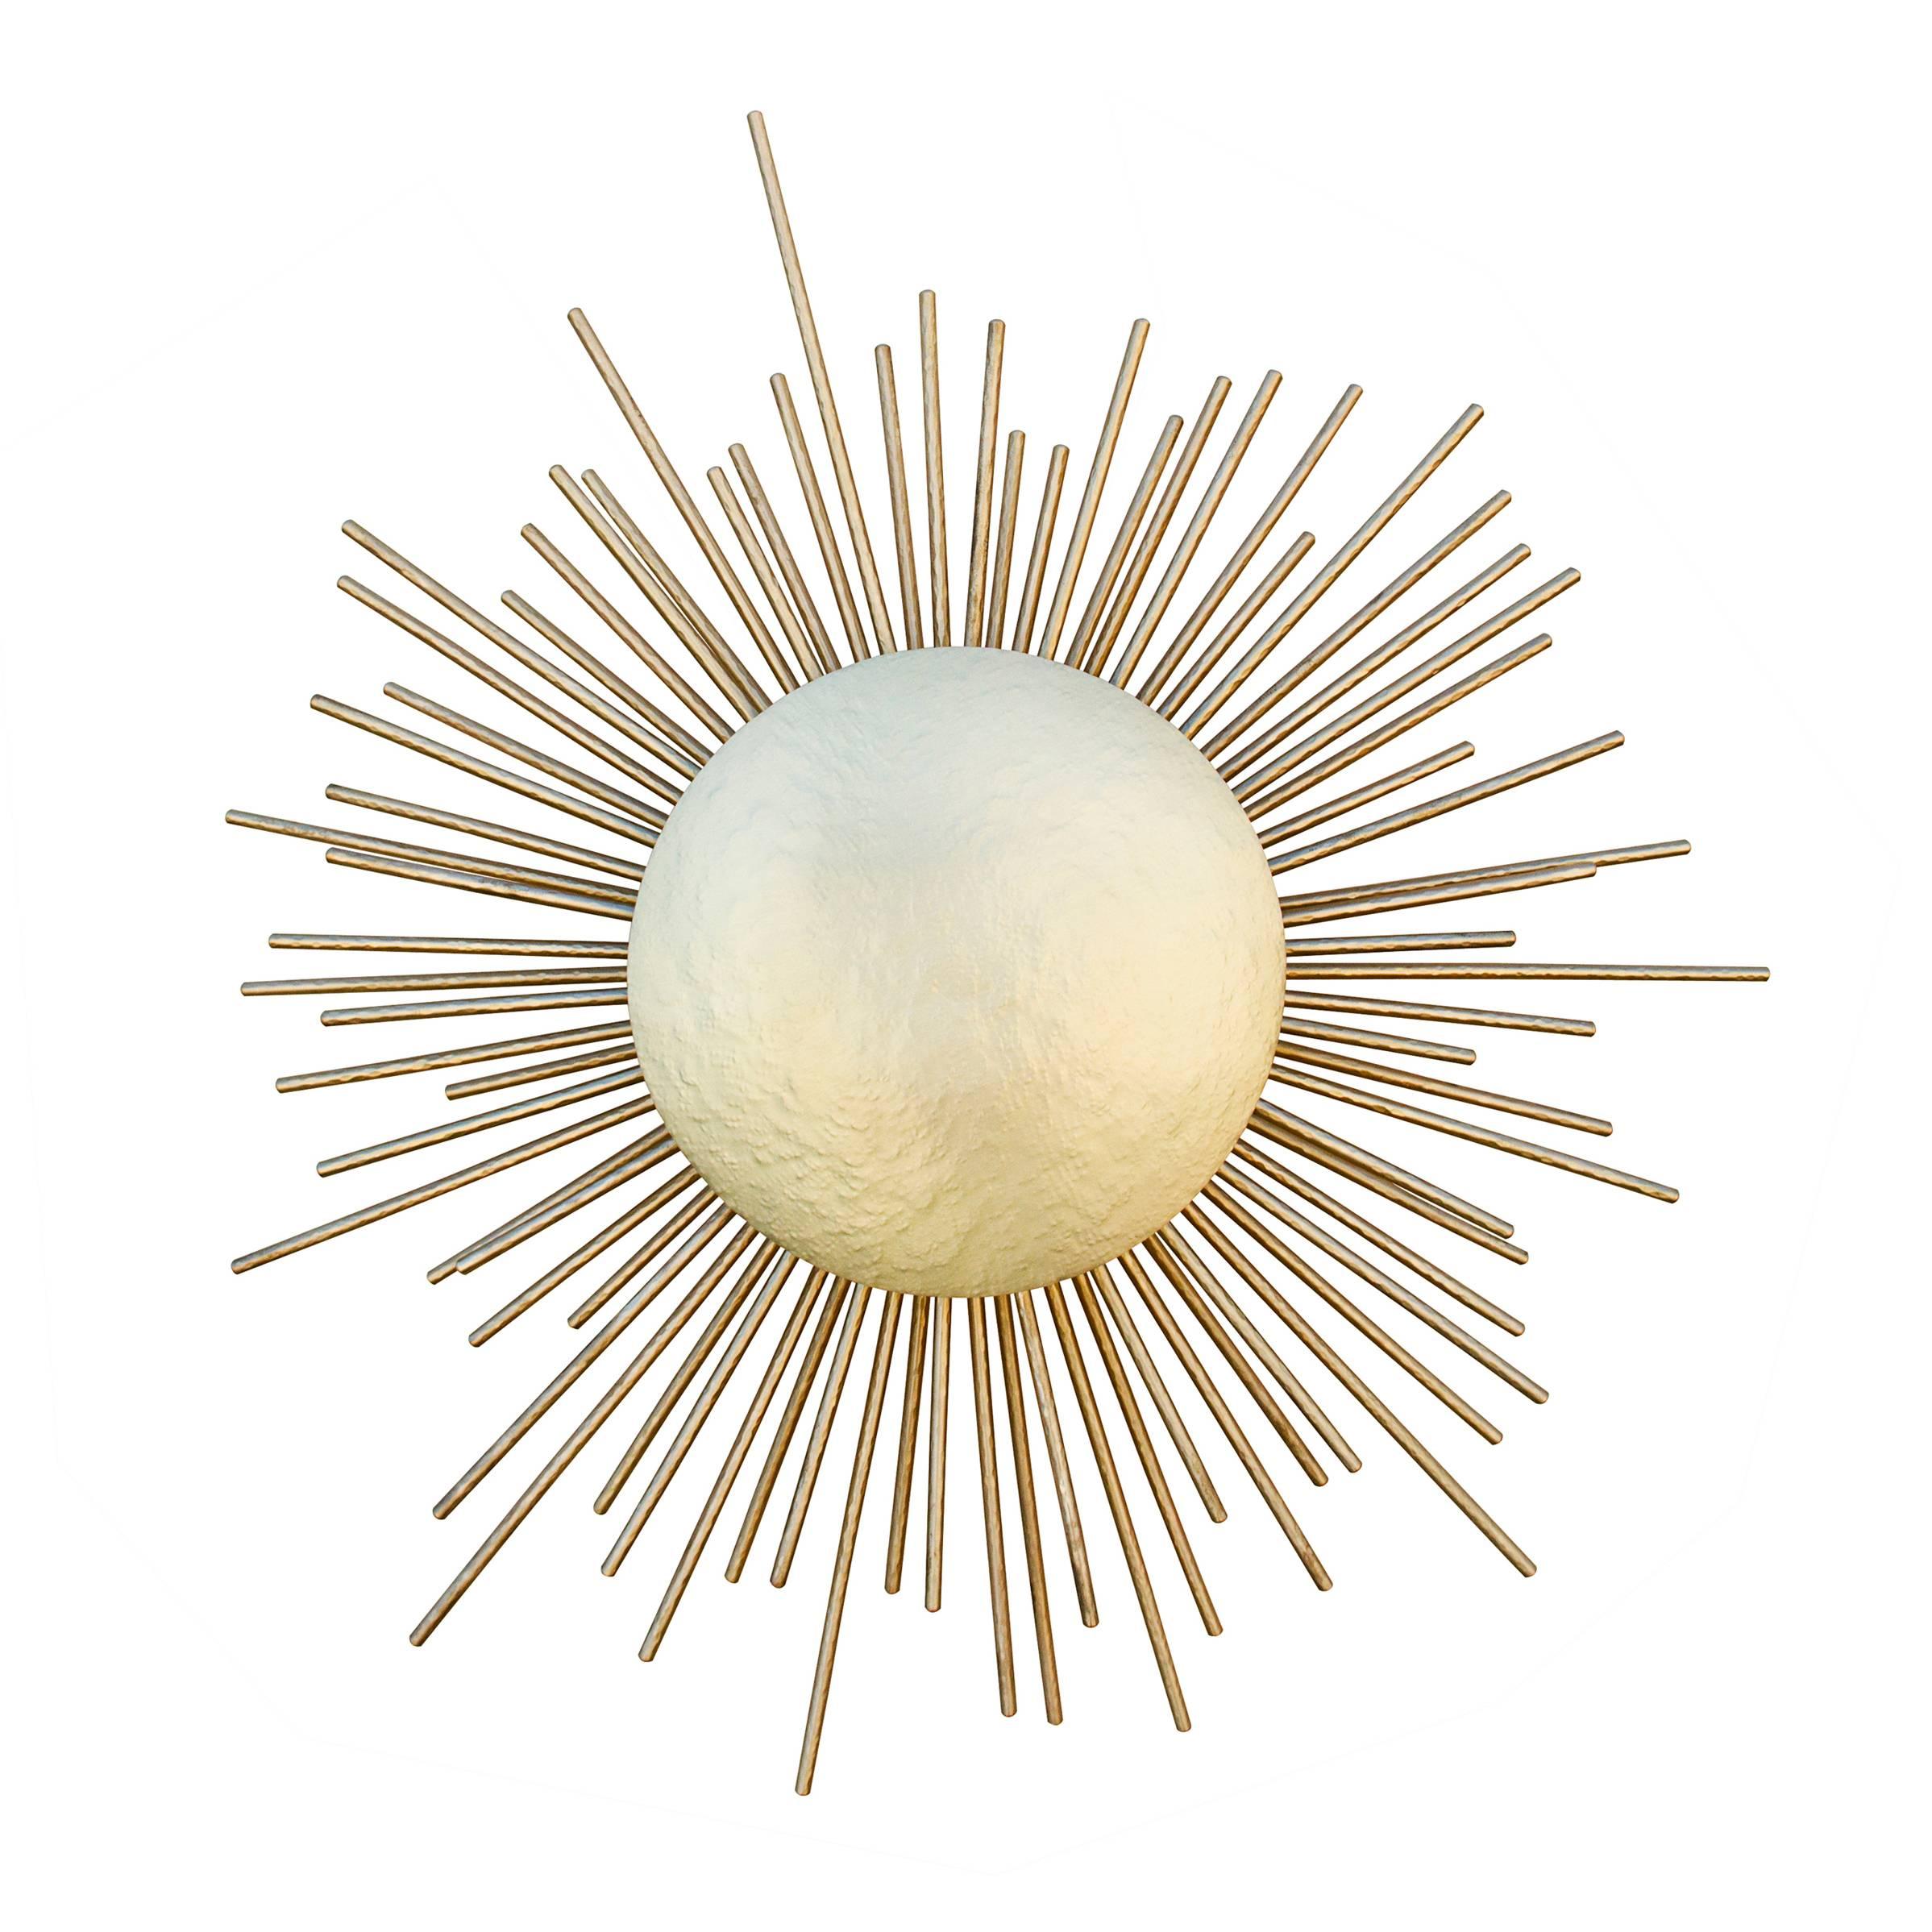 Wall light sunrise is in hammered brass and projects a
brightest light by the hammered brass rays as sunrise.
